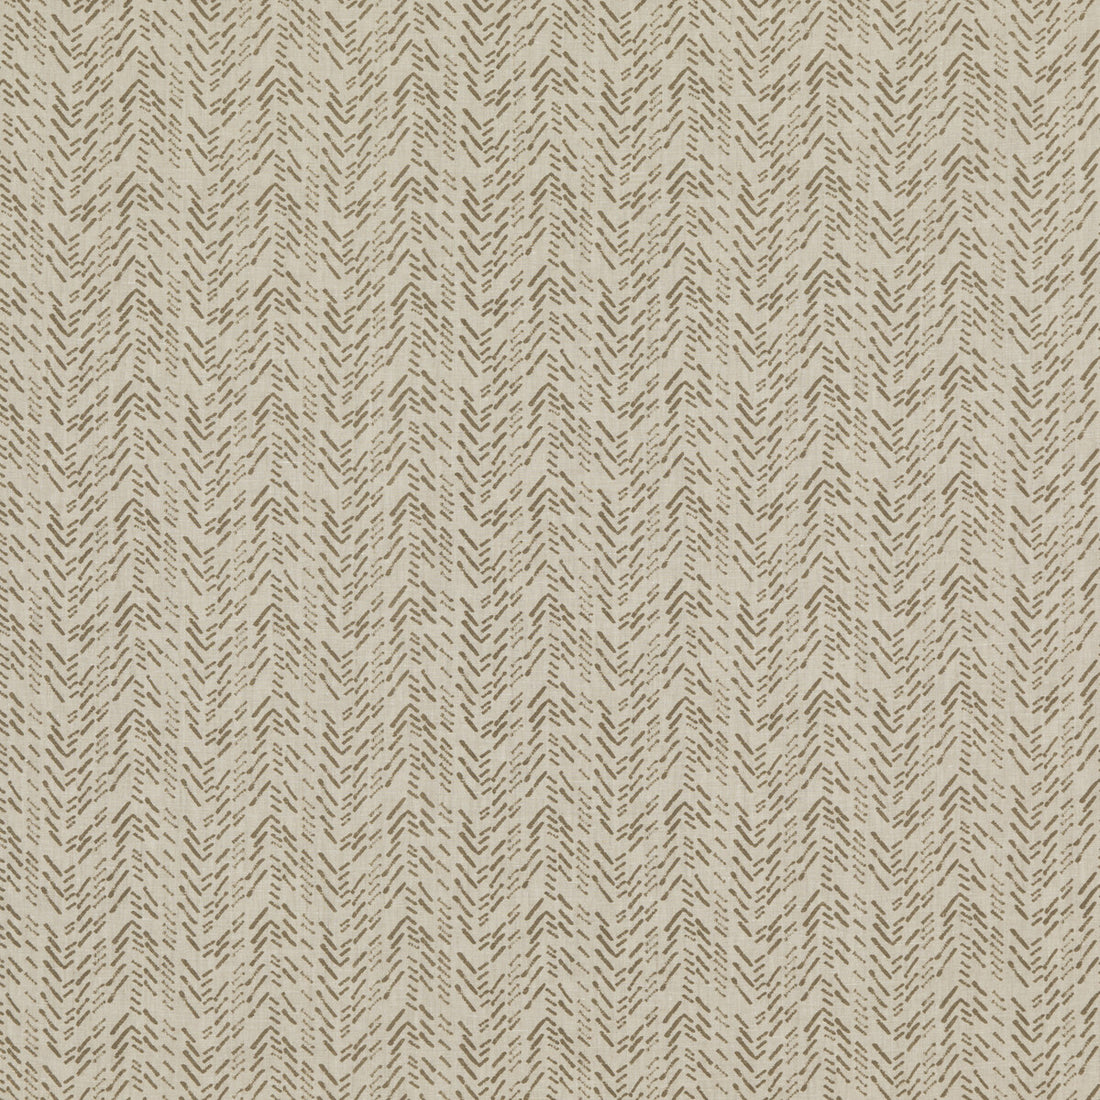 Izora fabric in bronze color - pattern ED75035.1.0 - by Threads in the Moro collection